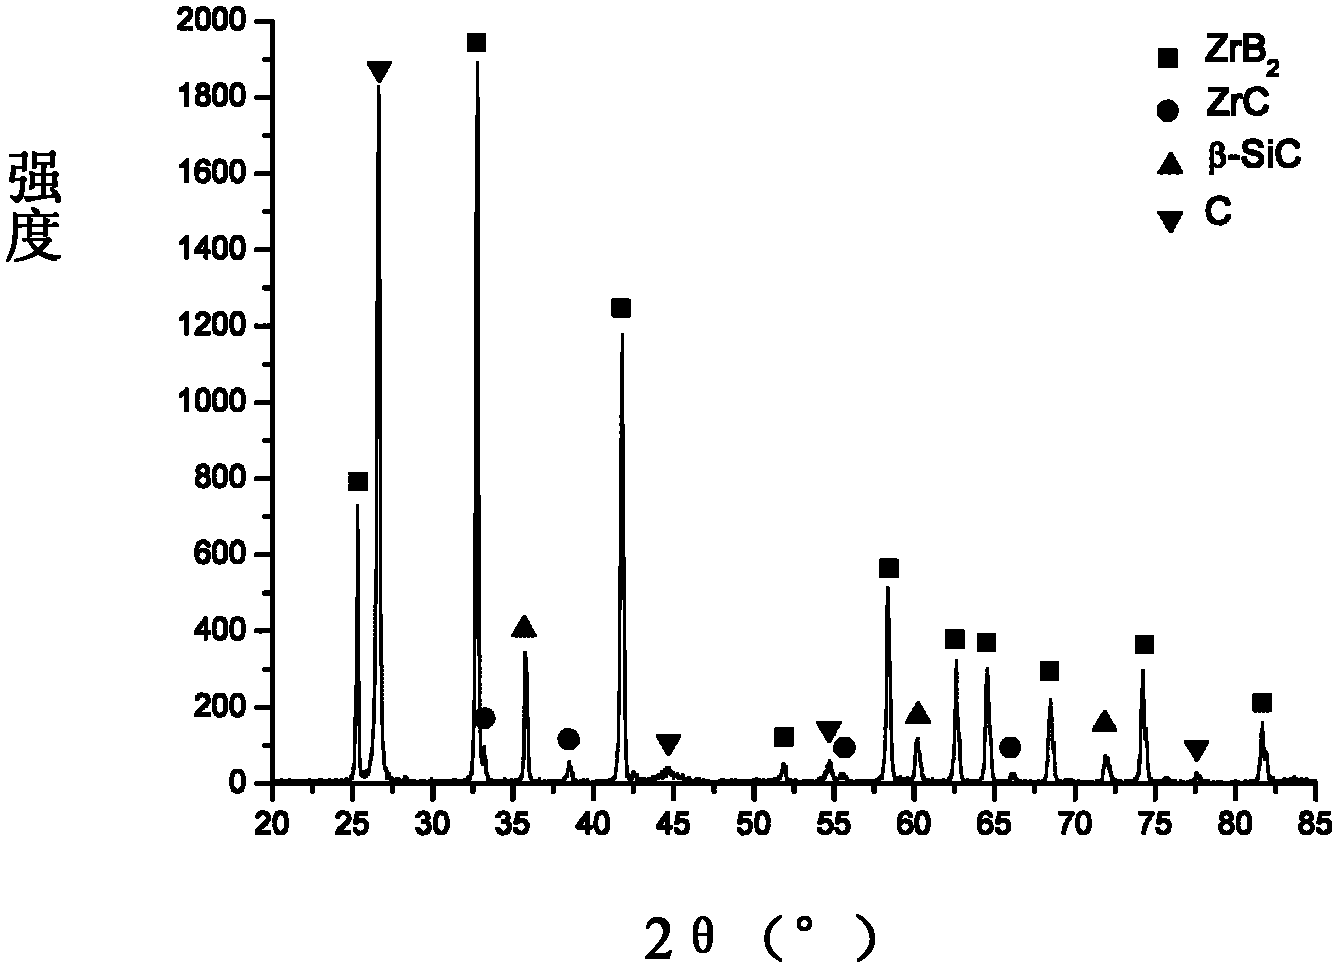 Zirconium diboride/silicon carbide composite material and method for preparing same by means of arc melting in-suit reaction